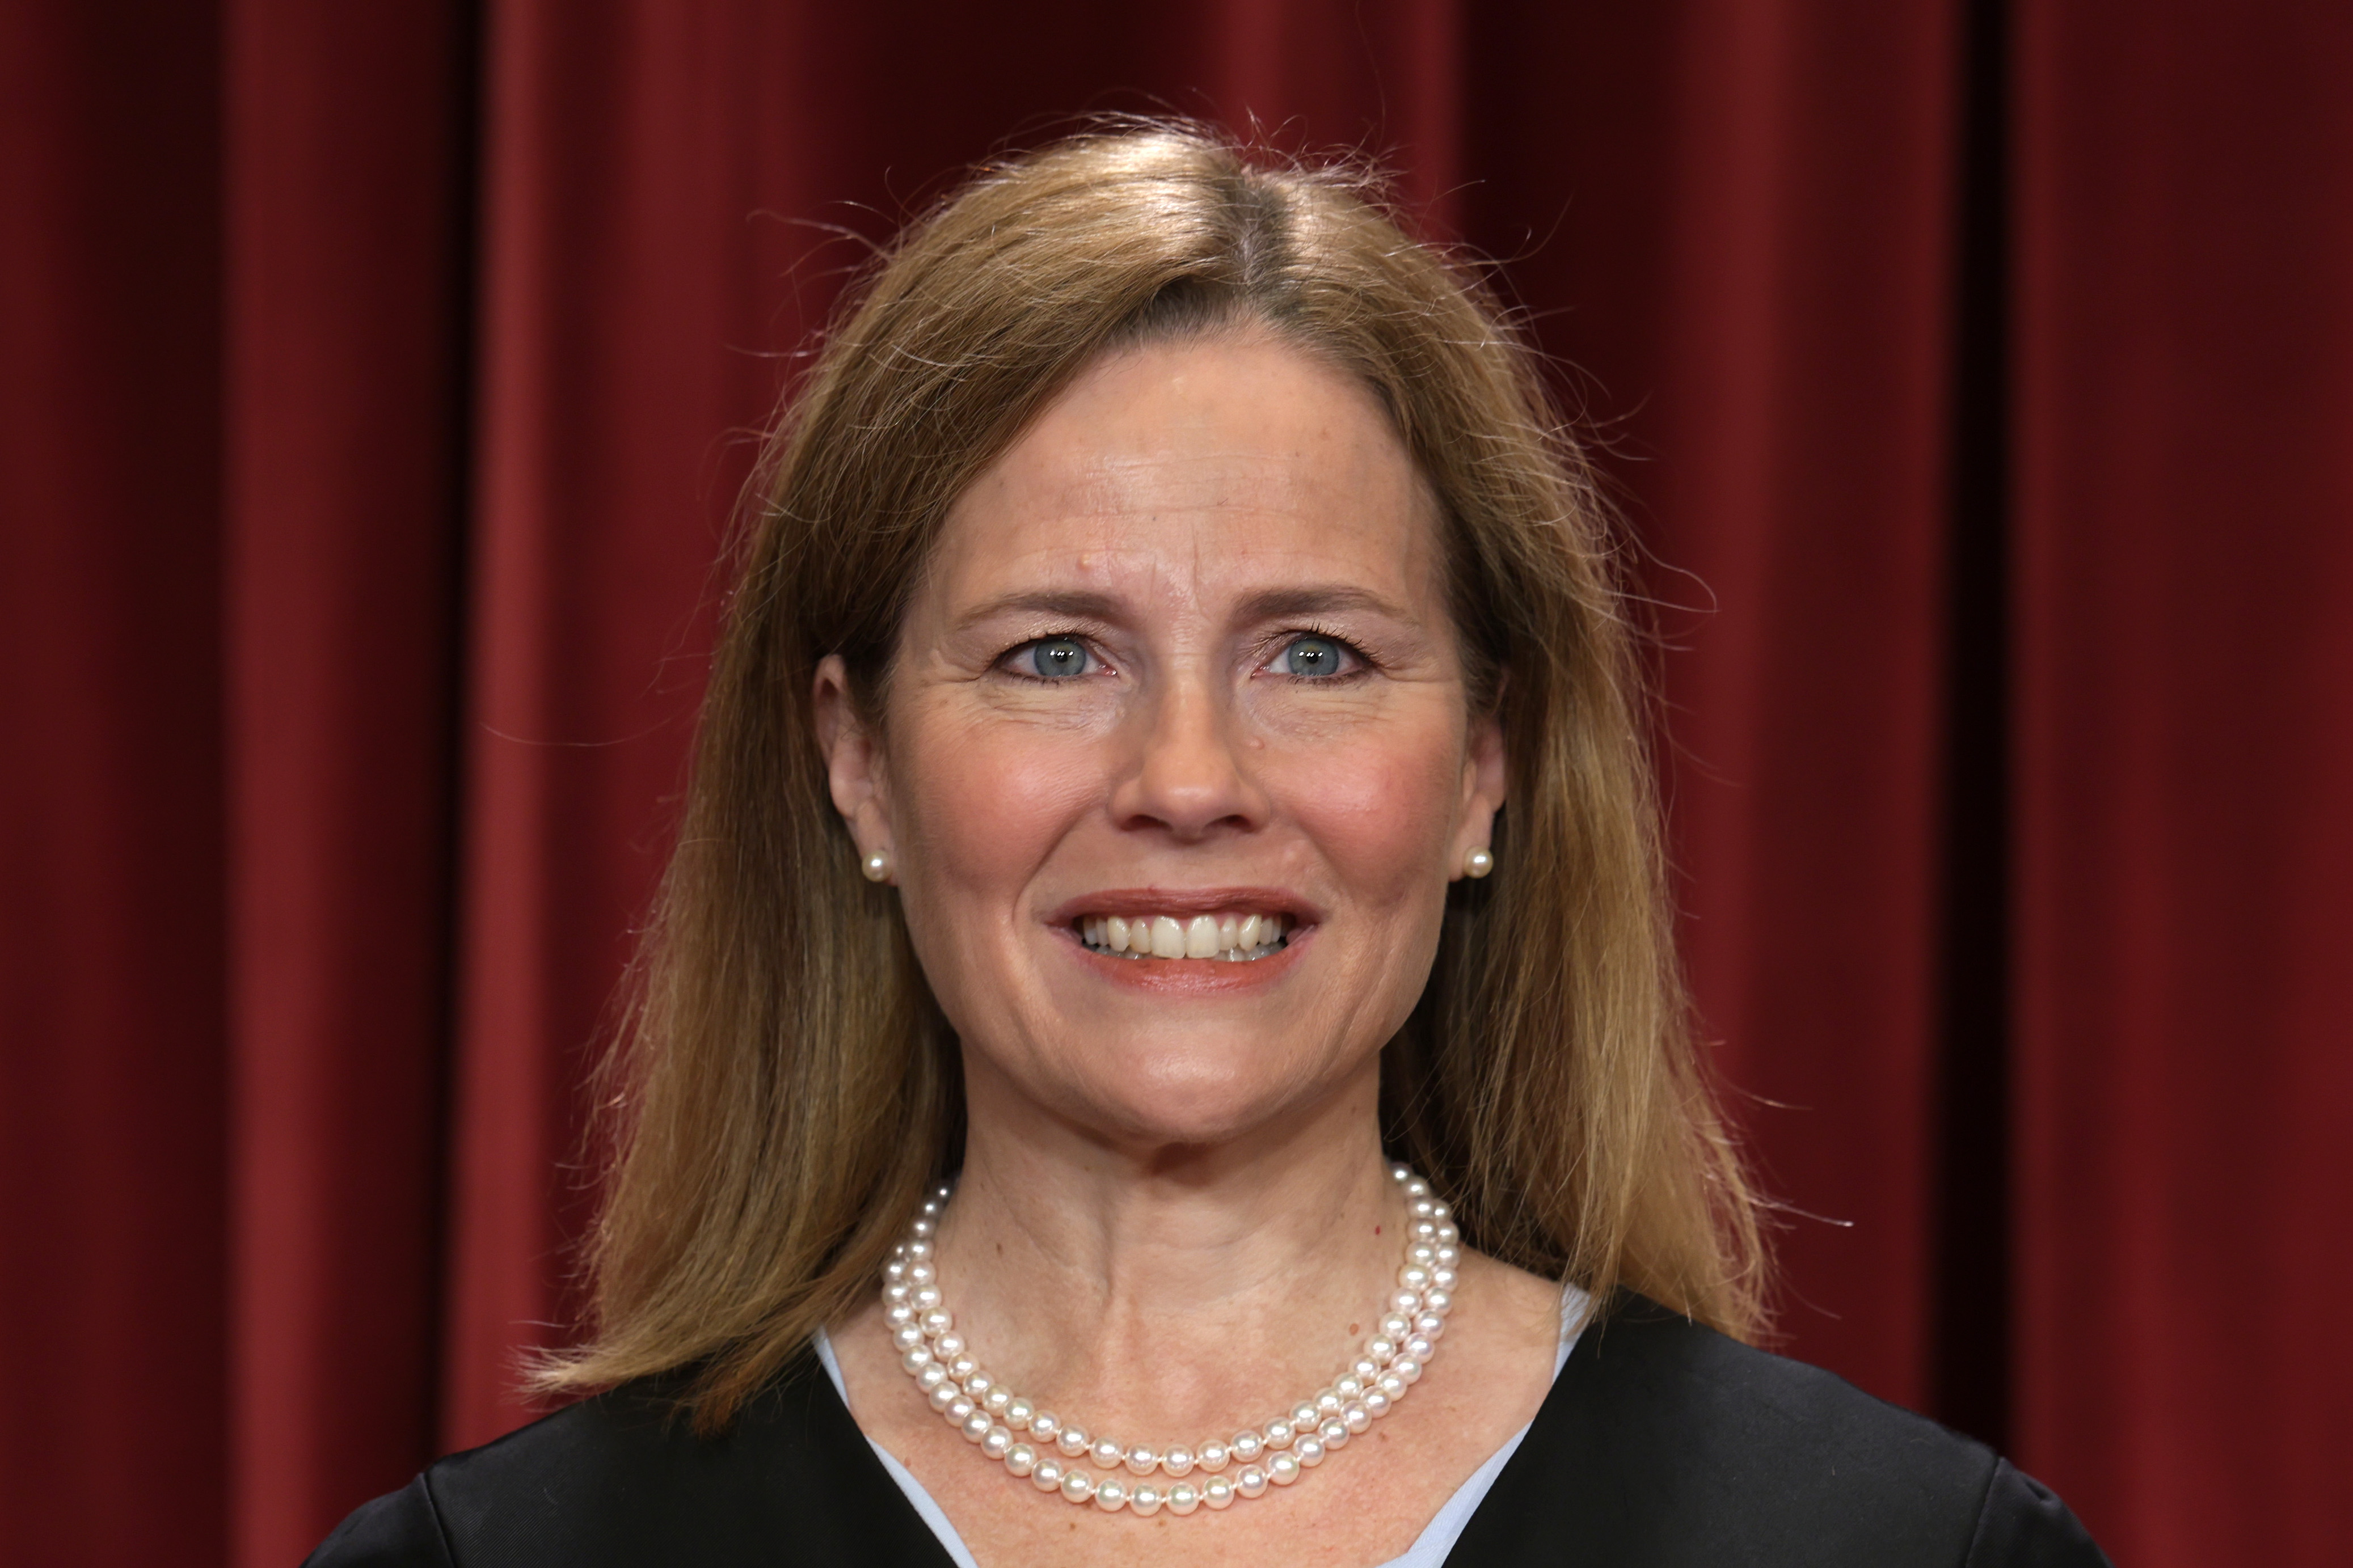 Justice Amy Coney Barrett poses for an official portrait at the Supreme Court in Washington, DC, in 2022.